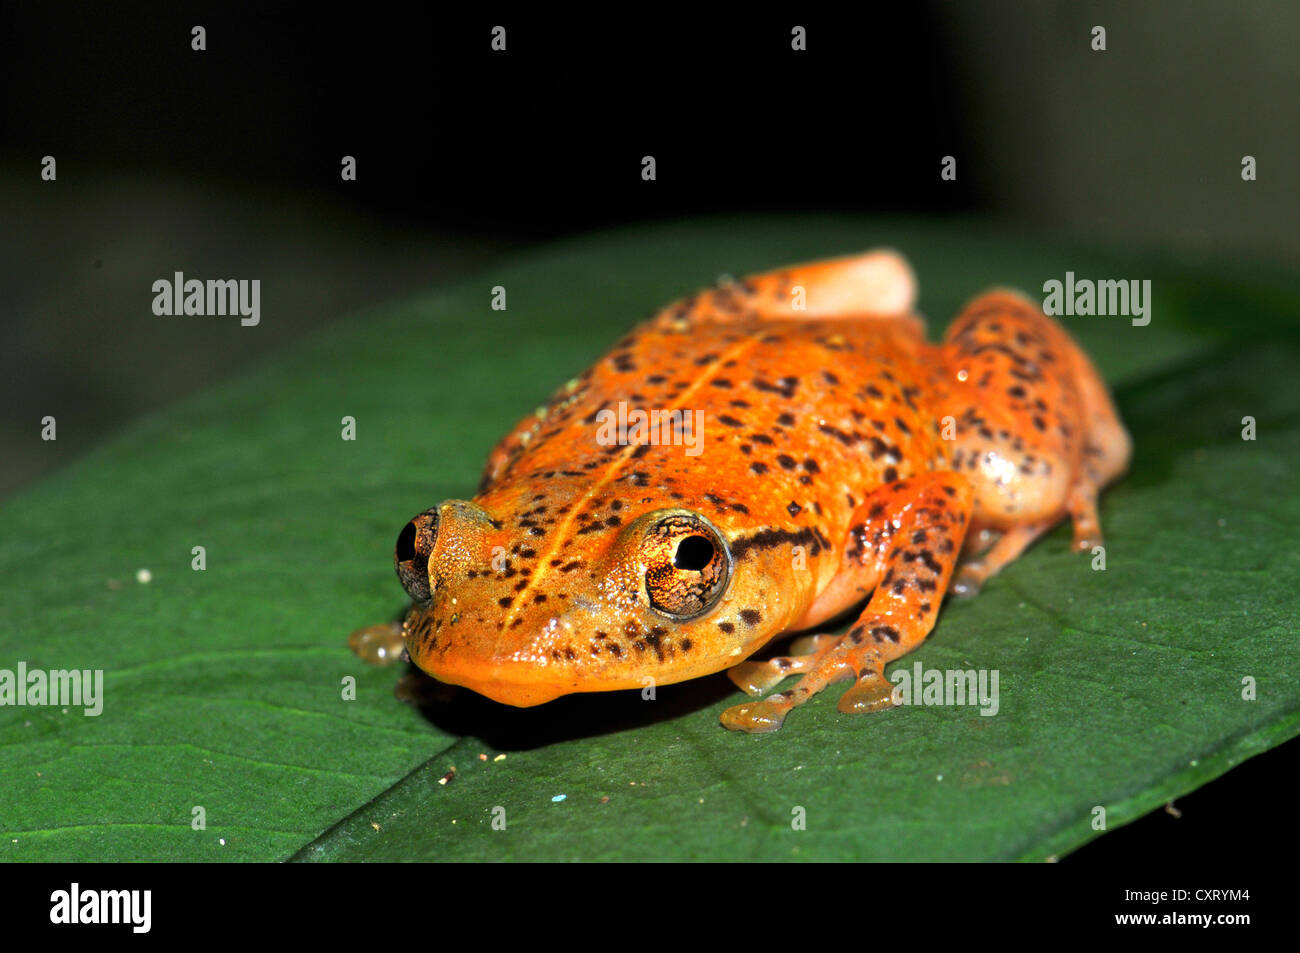 Frog of the species Platypelis in the rain forests of eastern Madagascar, Africa Stock Photo